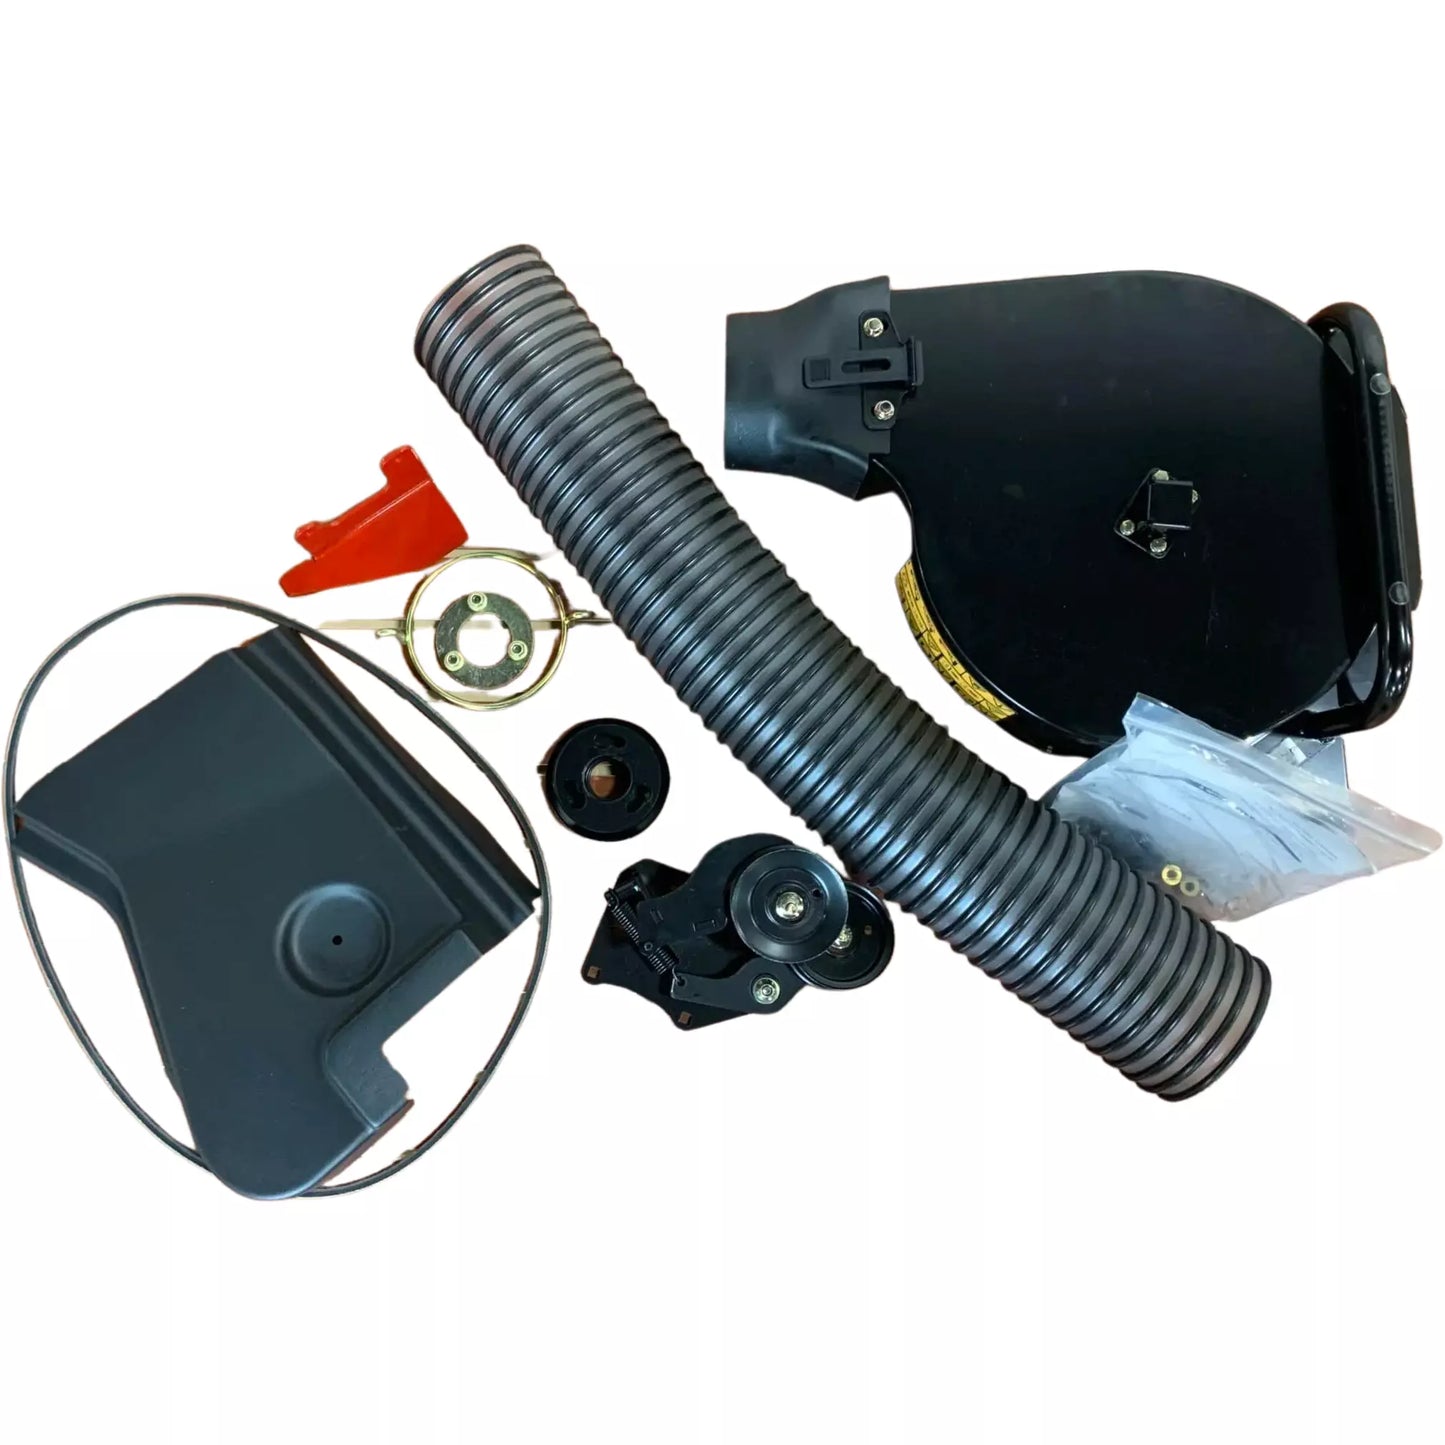 GrandStand E-Z Vac Blower & Drive Kit for 60 in. Deck